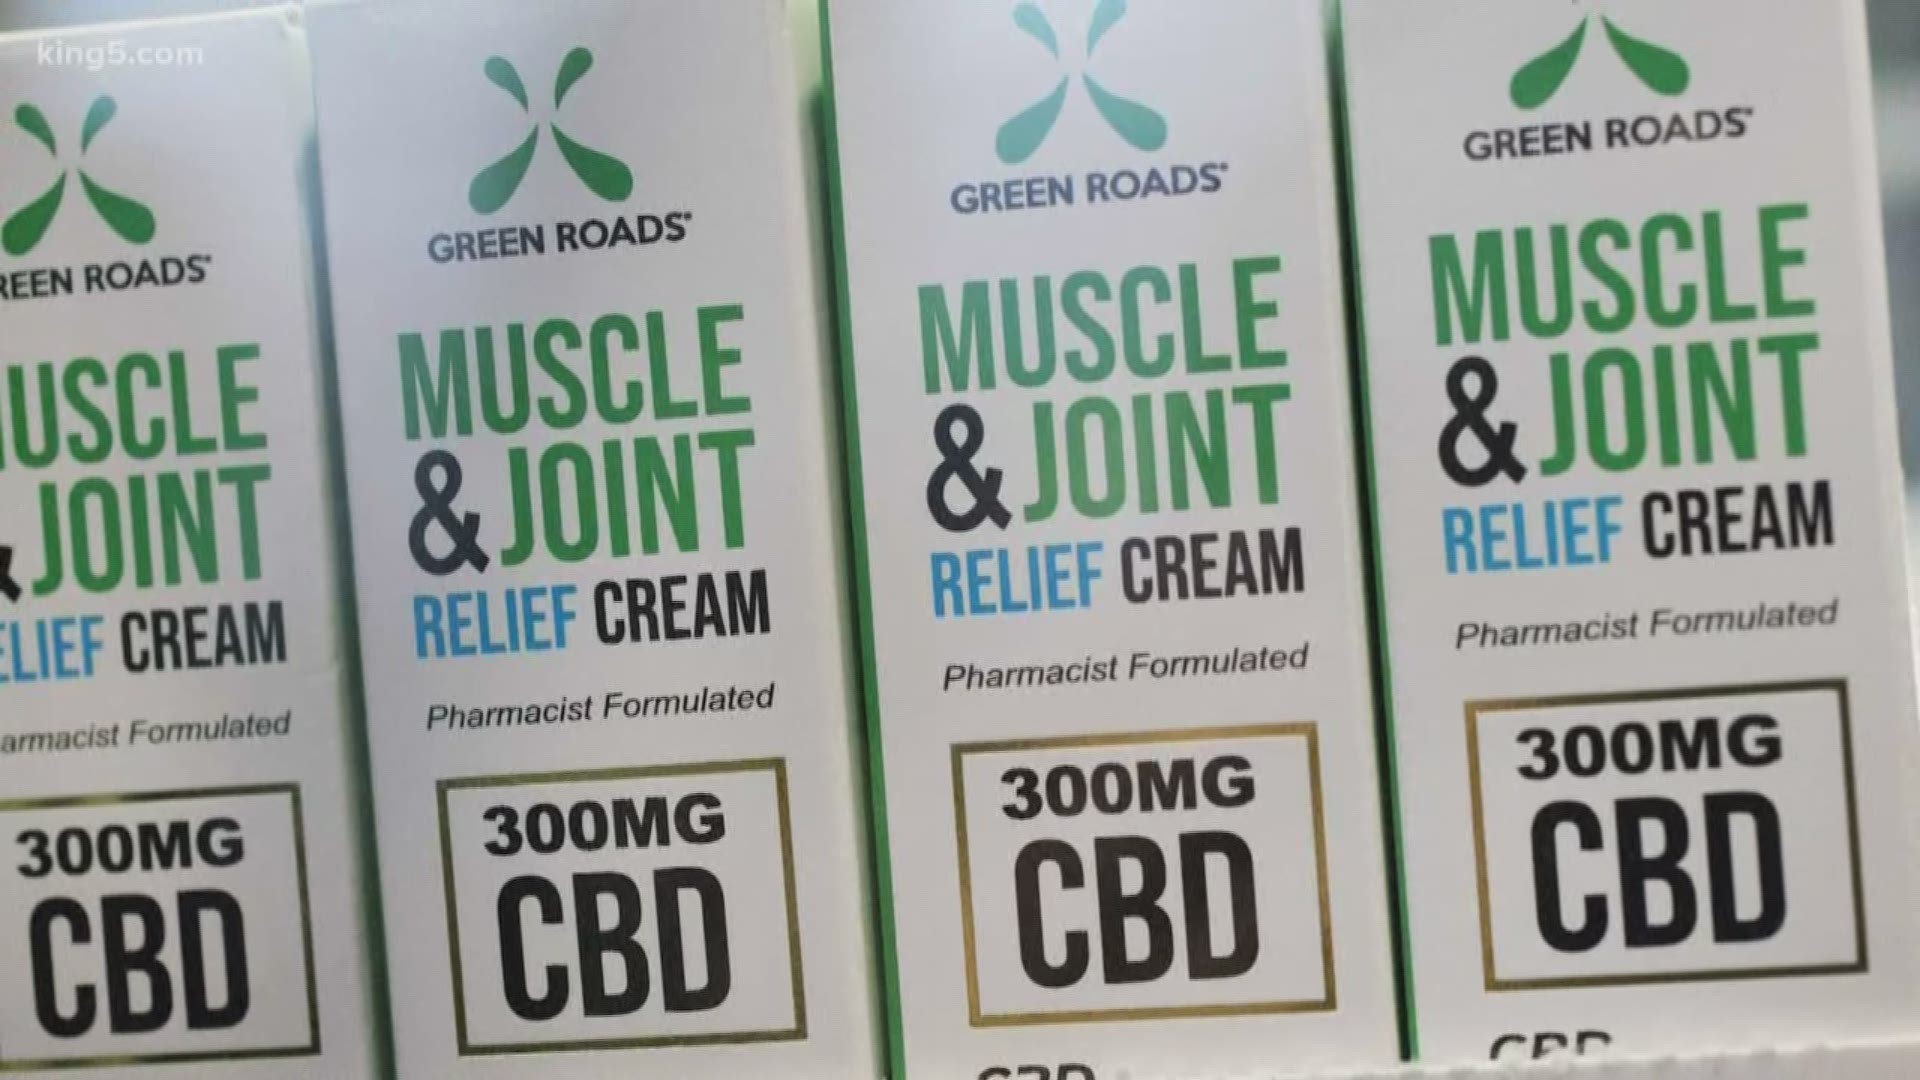 Products featuring Cannabidiol have been filling shelves across the country, but the science and regulation surrounding the drug remains underdeveloped.